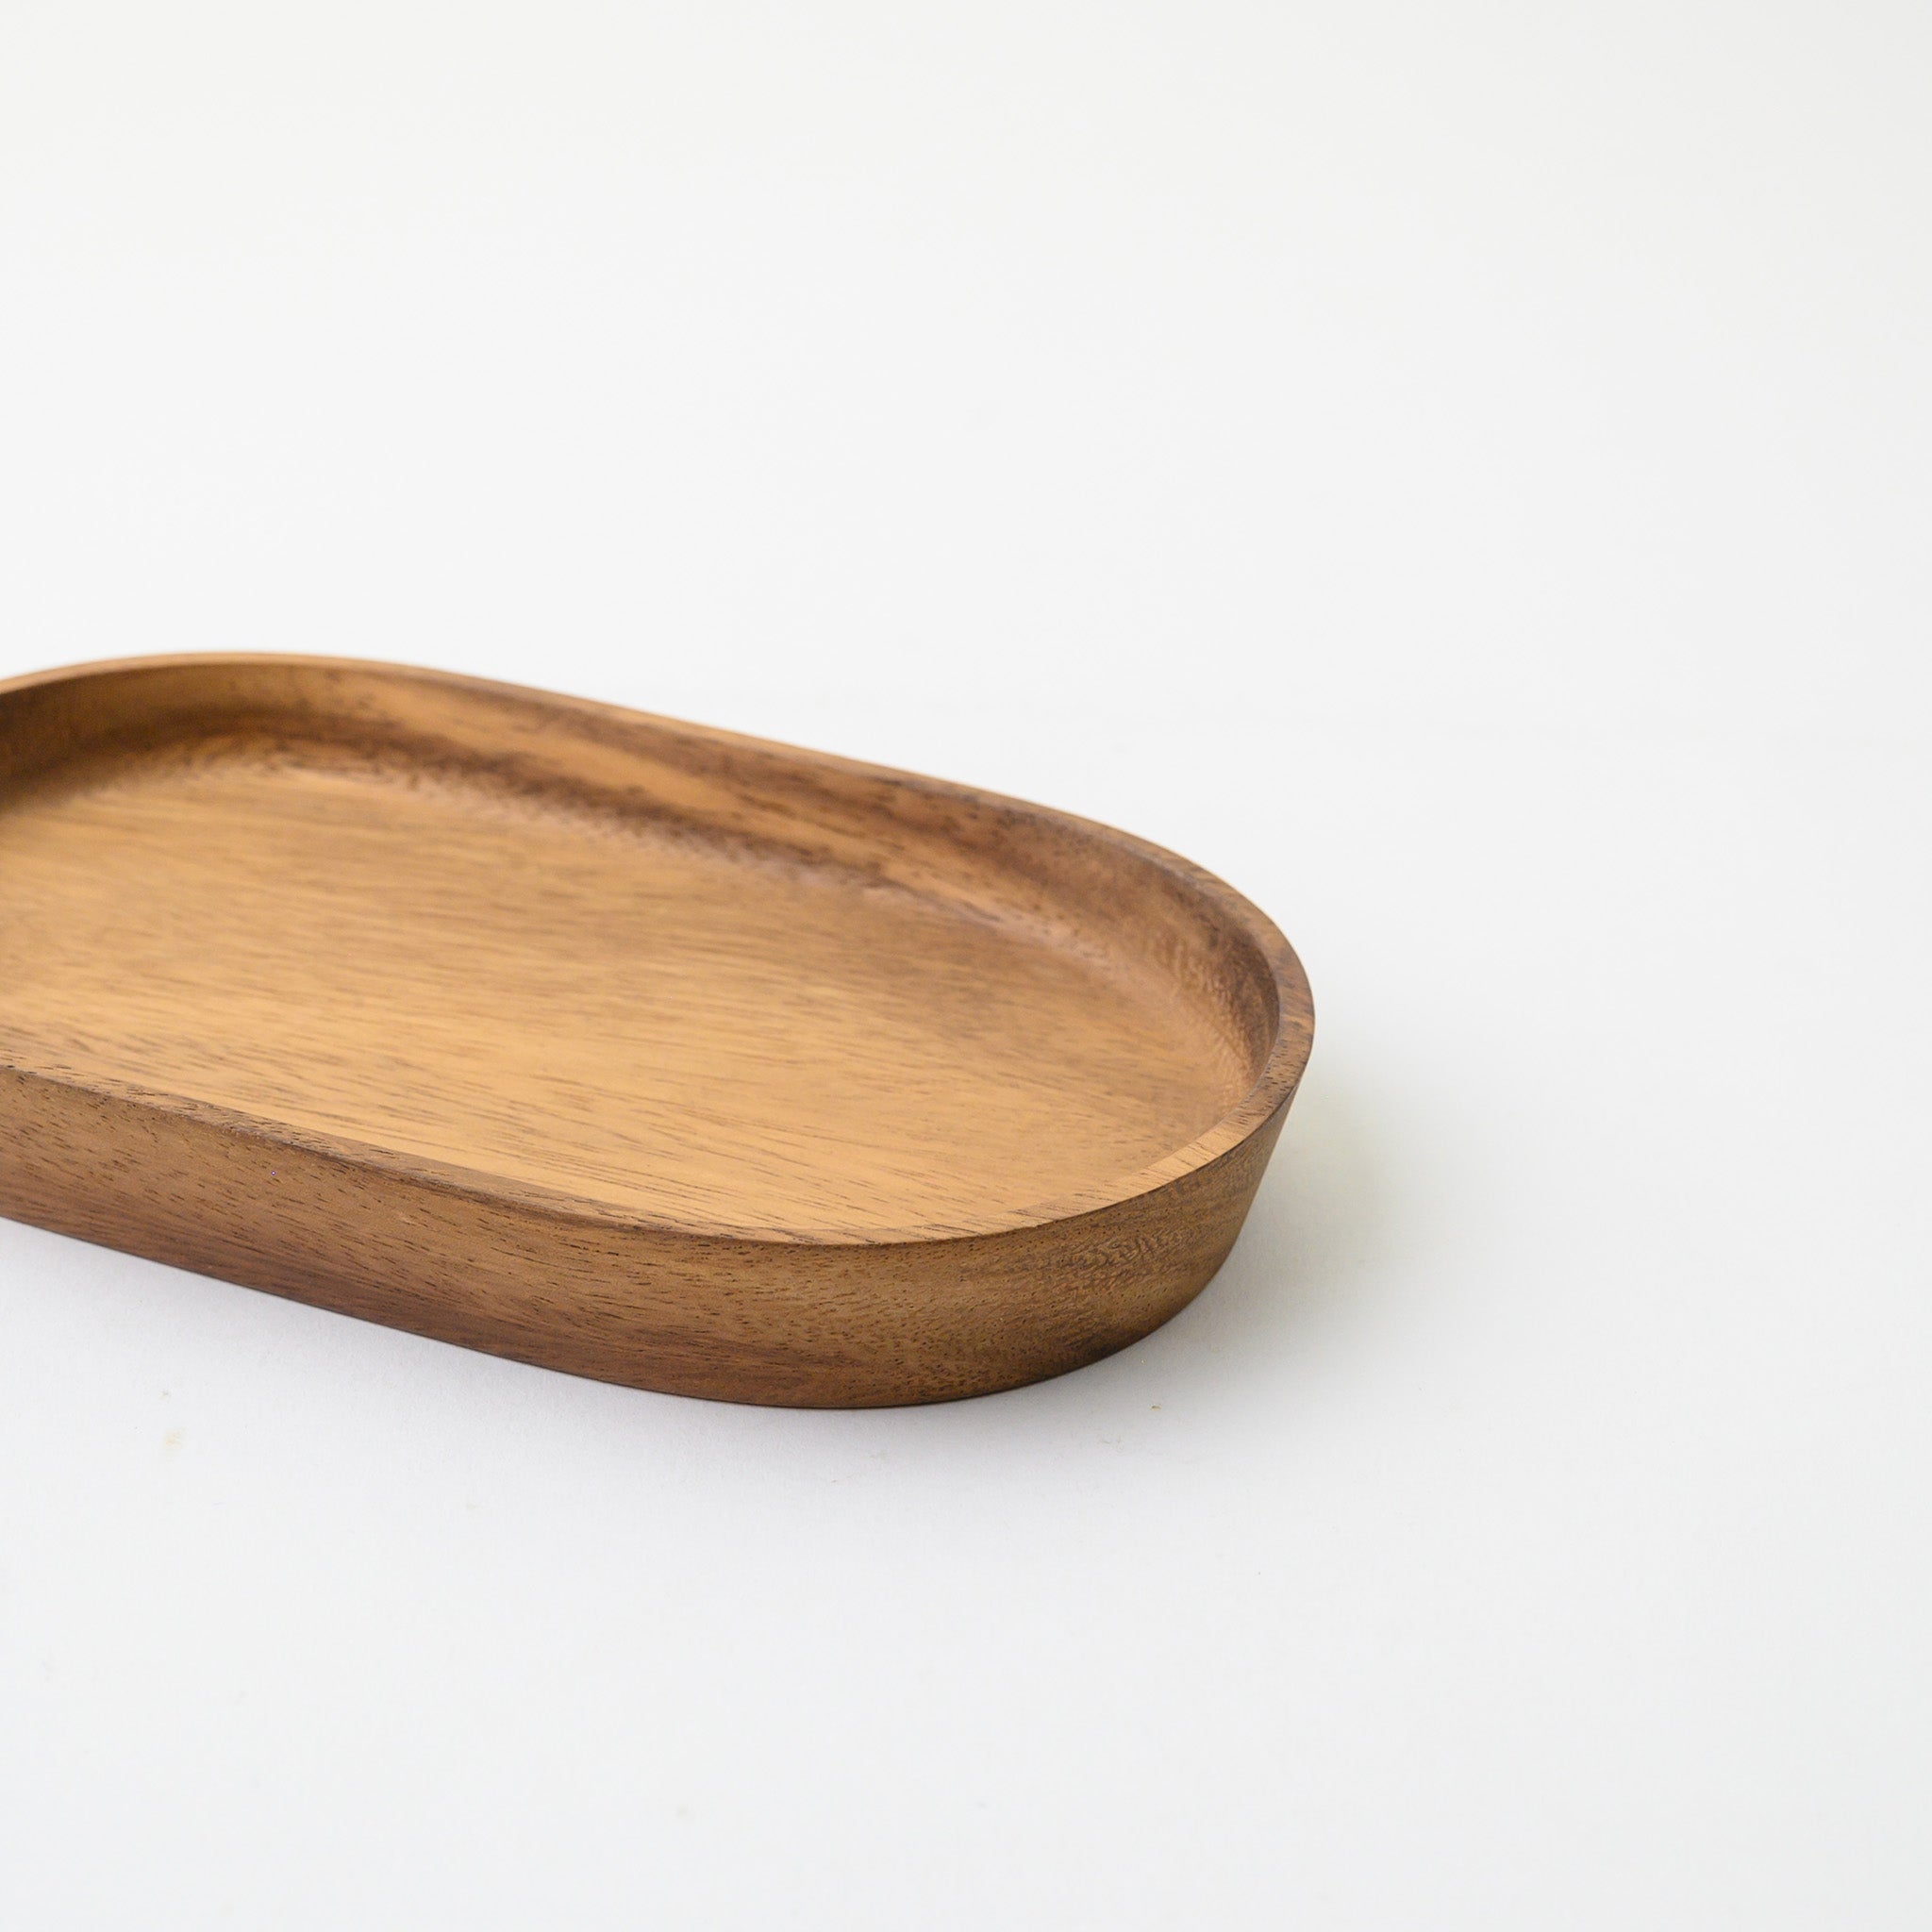 LIMPID OVAL TRAY S